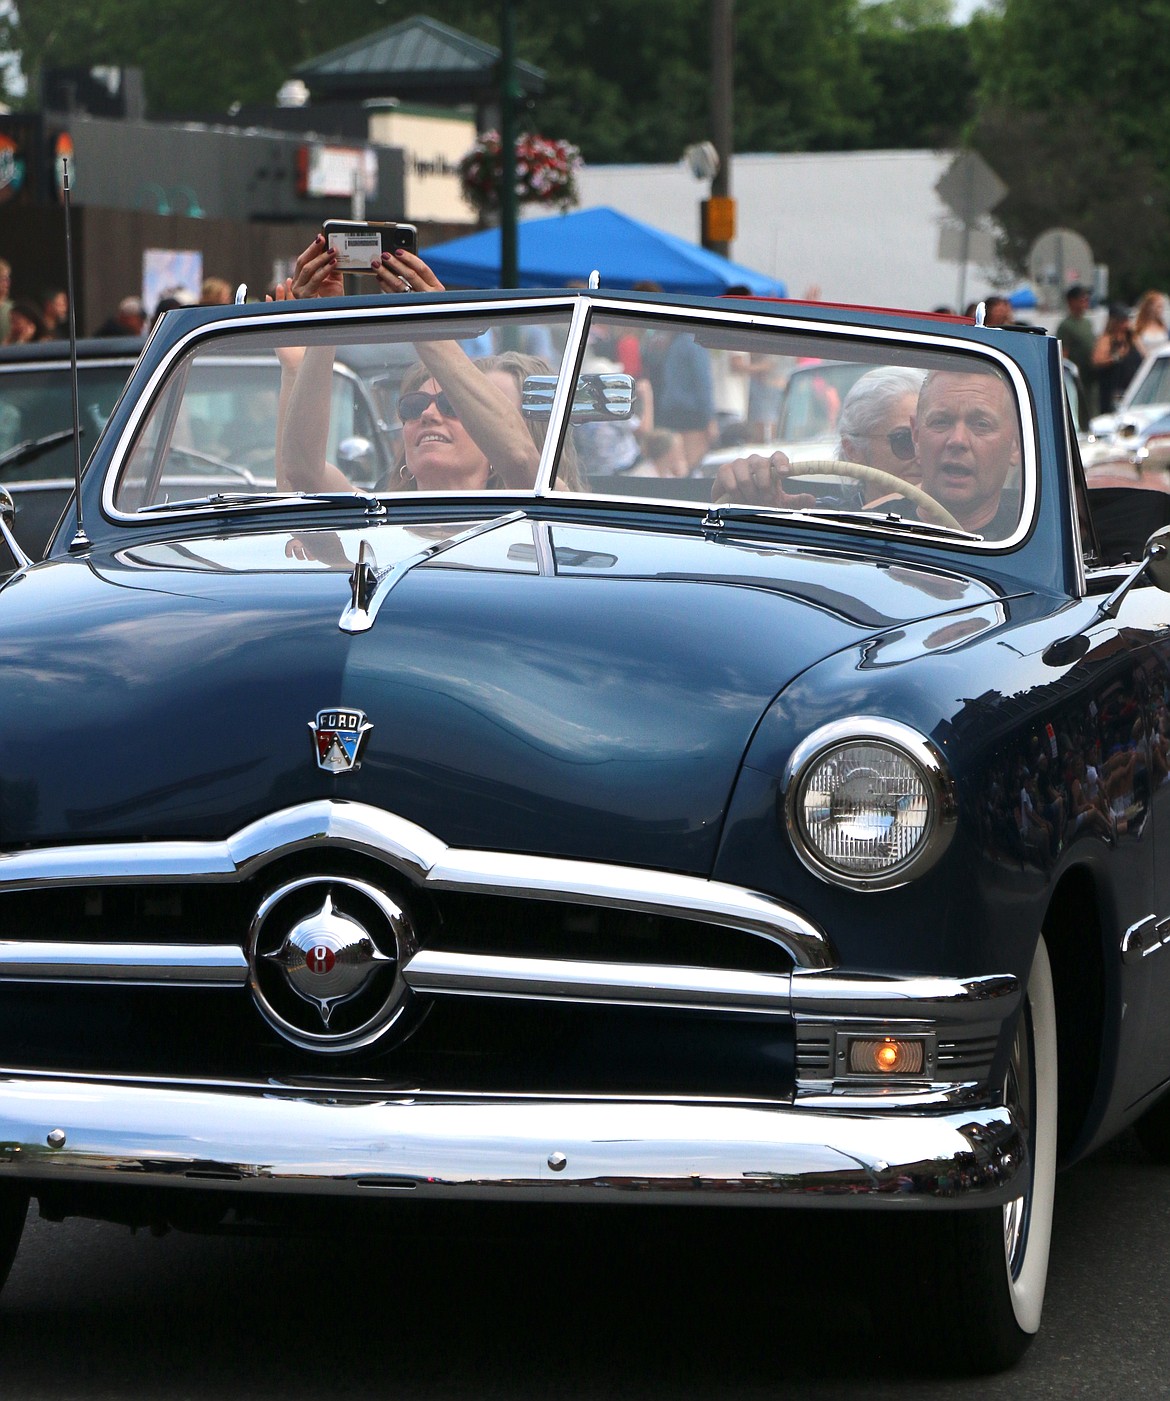 A Lost in the '50s car parade participants film the crowd from a classic ride as they make their way down First Avenue during the classic car parade on Friday night.